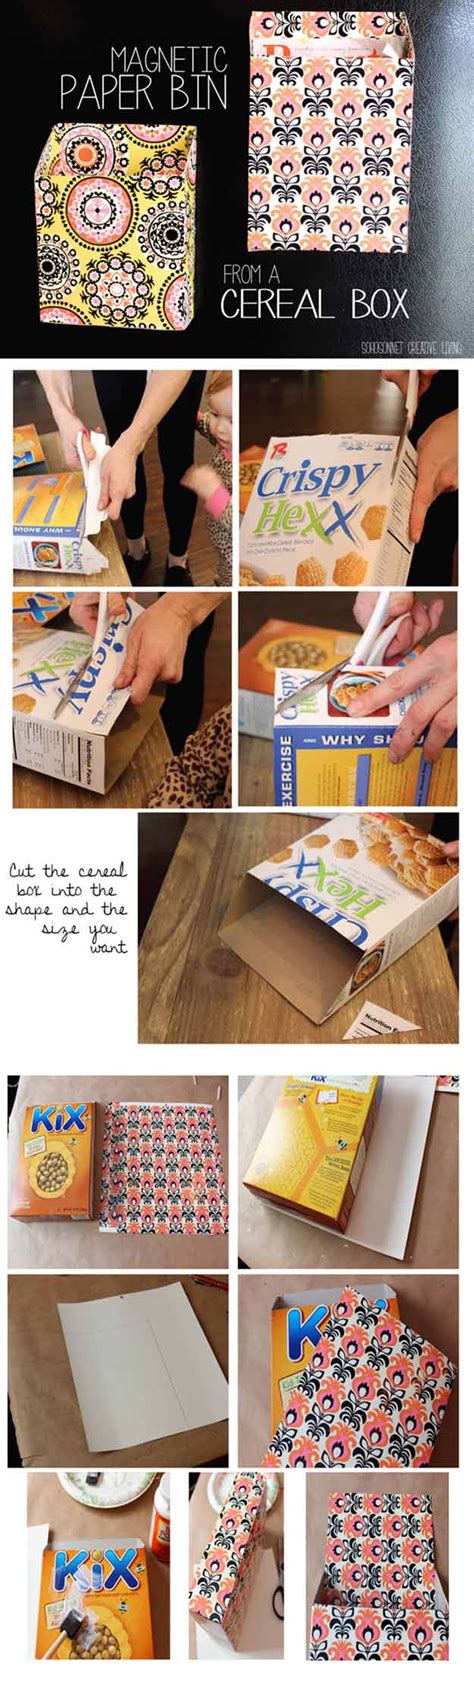 Printable pictures of cereal boxes. 28 Things You Can Make With Cereal Boxes | DIY Kids Crafts